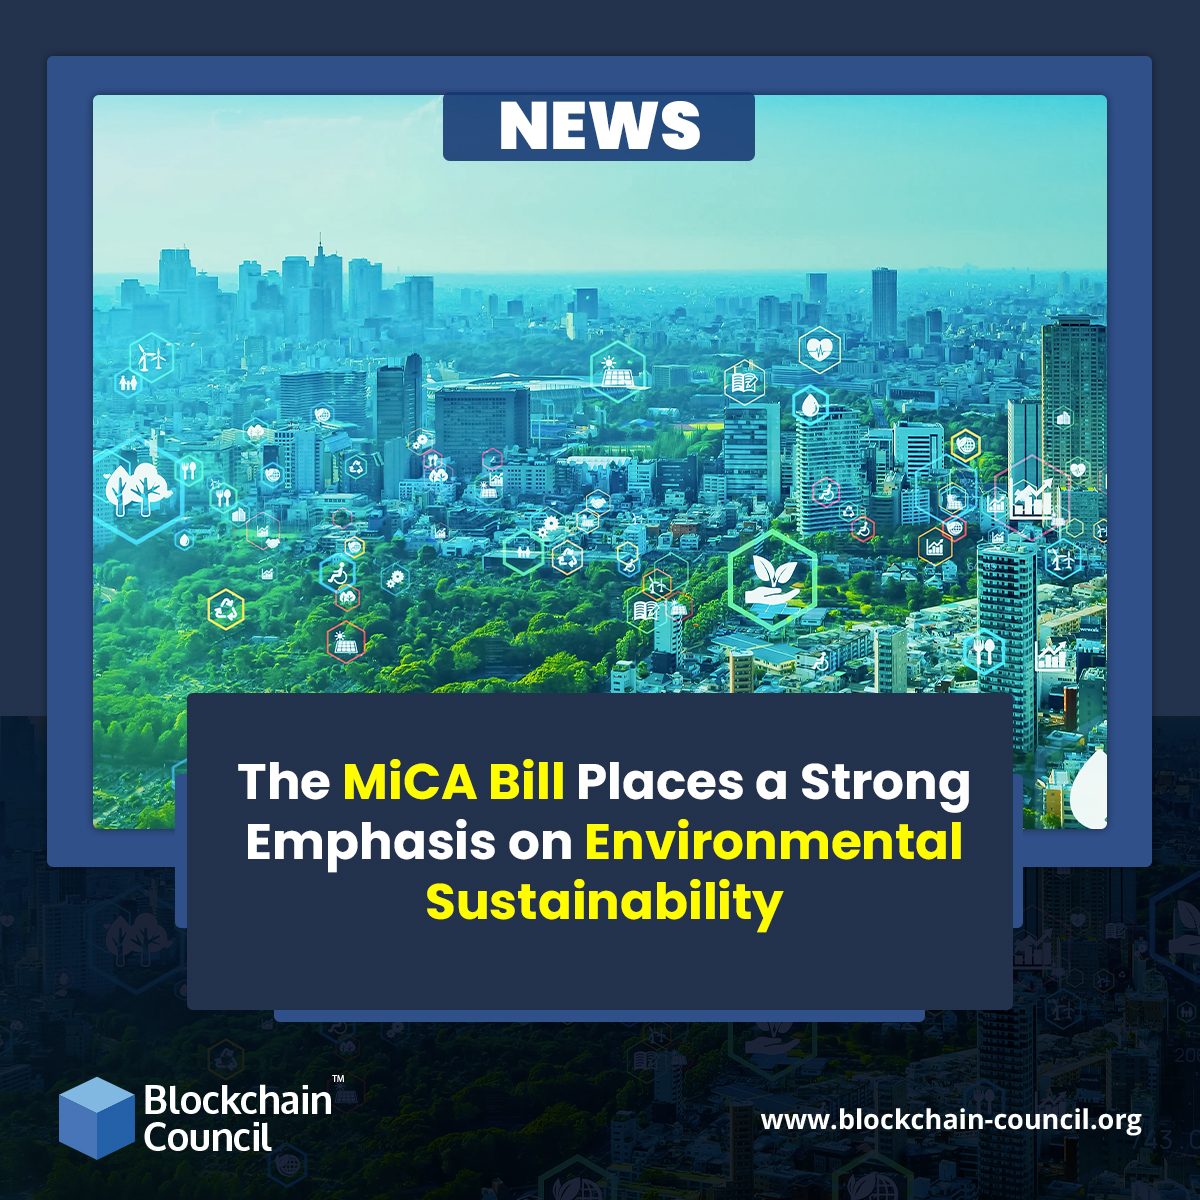 The MiCA Bill Places a Strong Emphasis on Environmental Sustainability